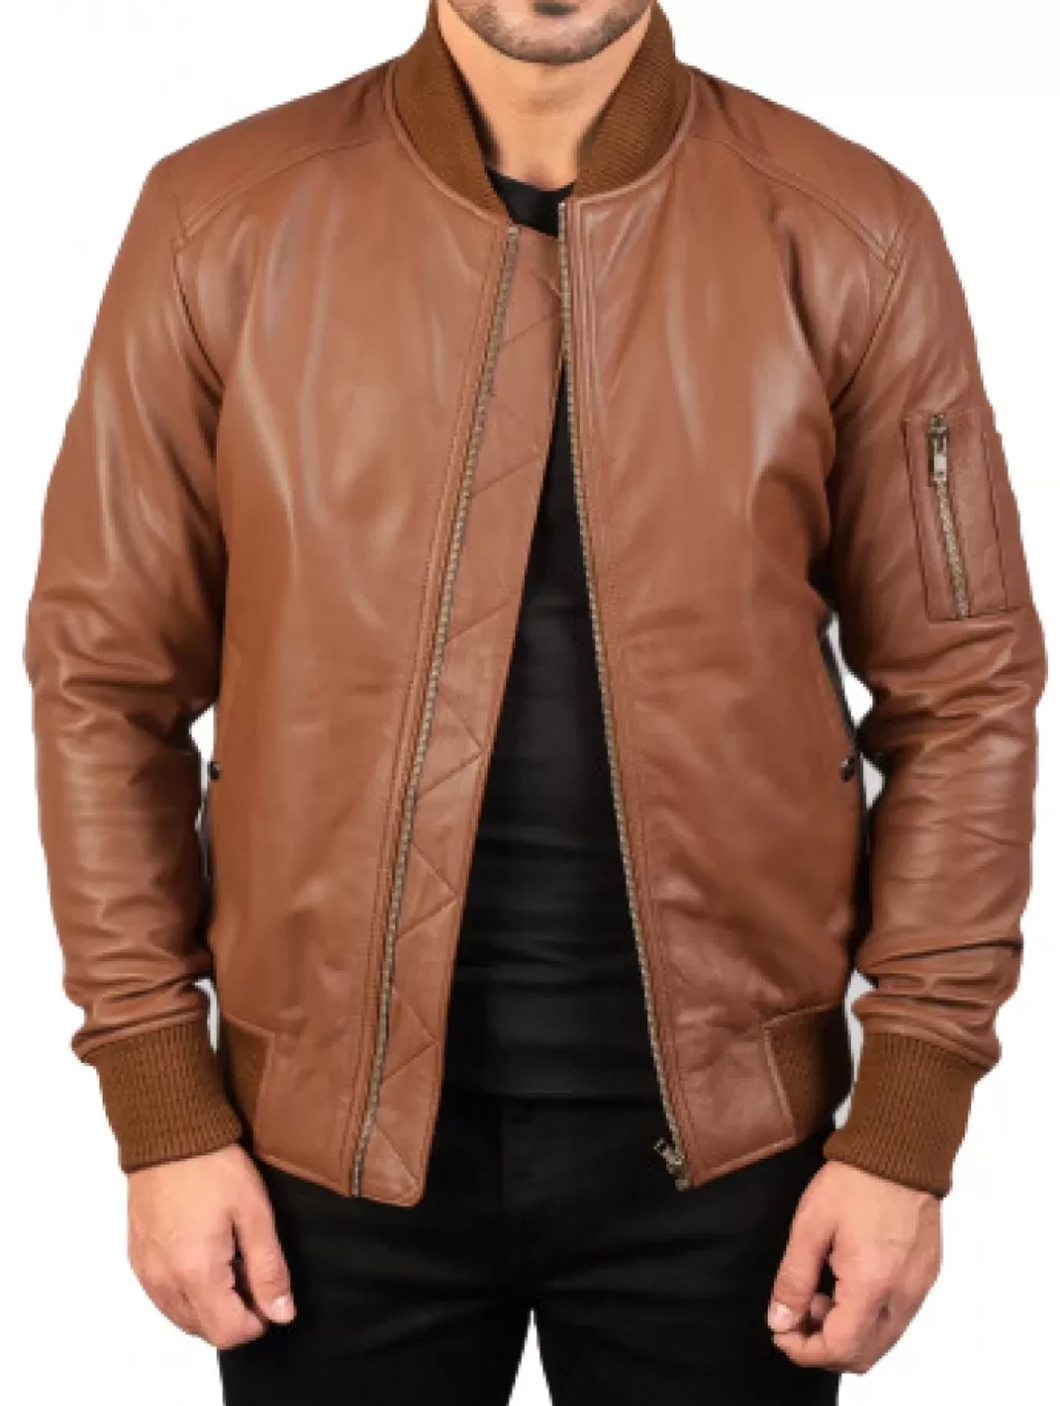 Men's Casual Brown Slim Fit Leather Bomber Varsity Jackets